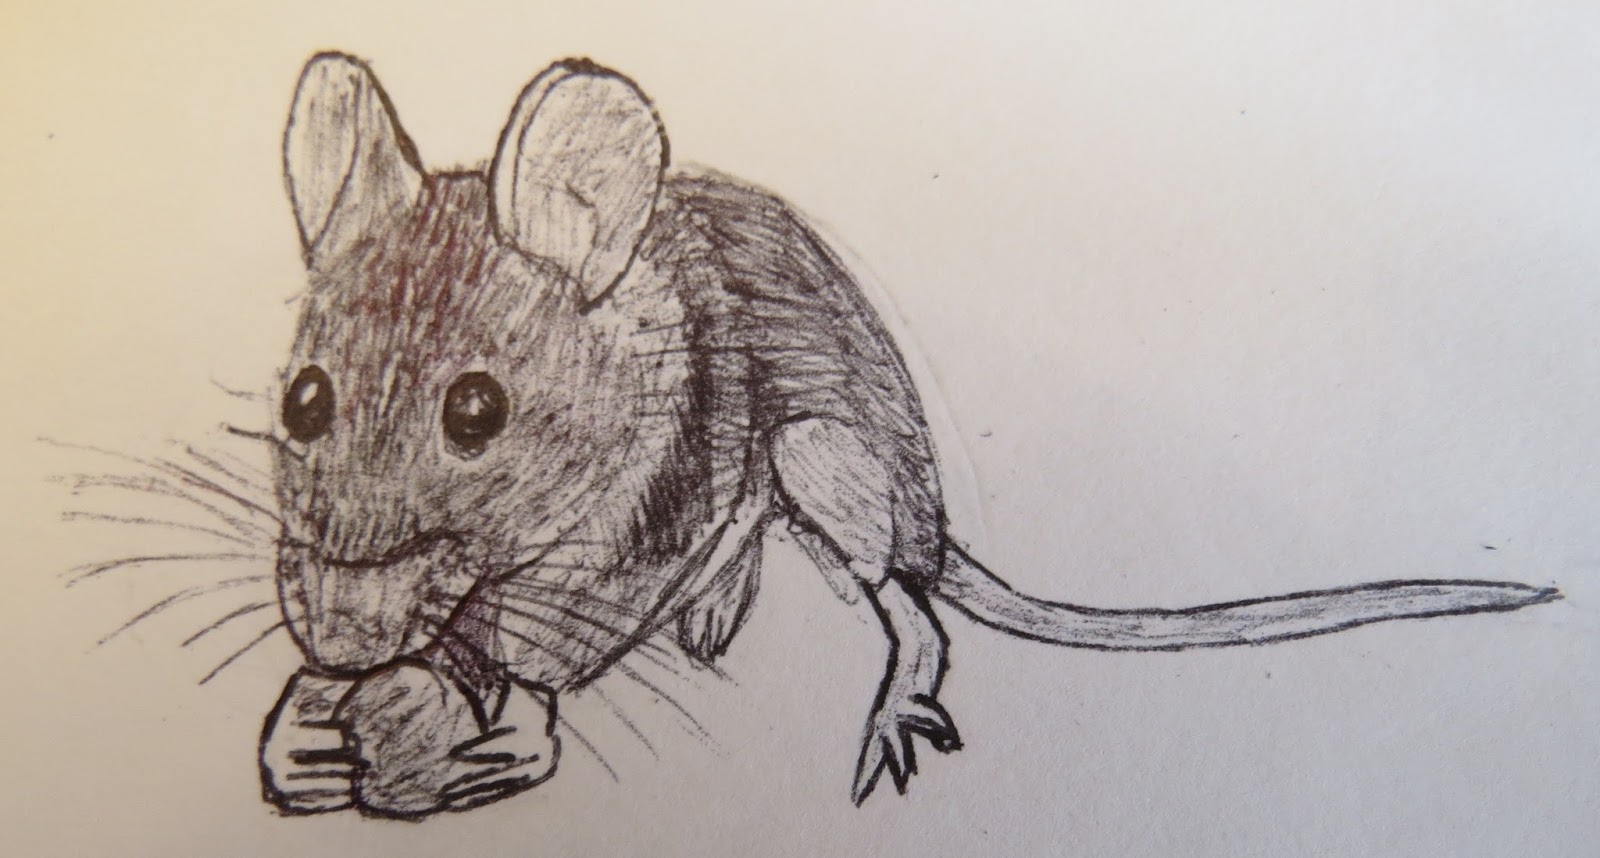 The Autistic Naturalist: How To Draw: Small Mammals